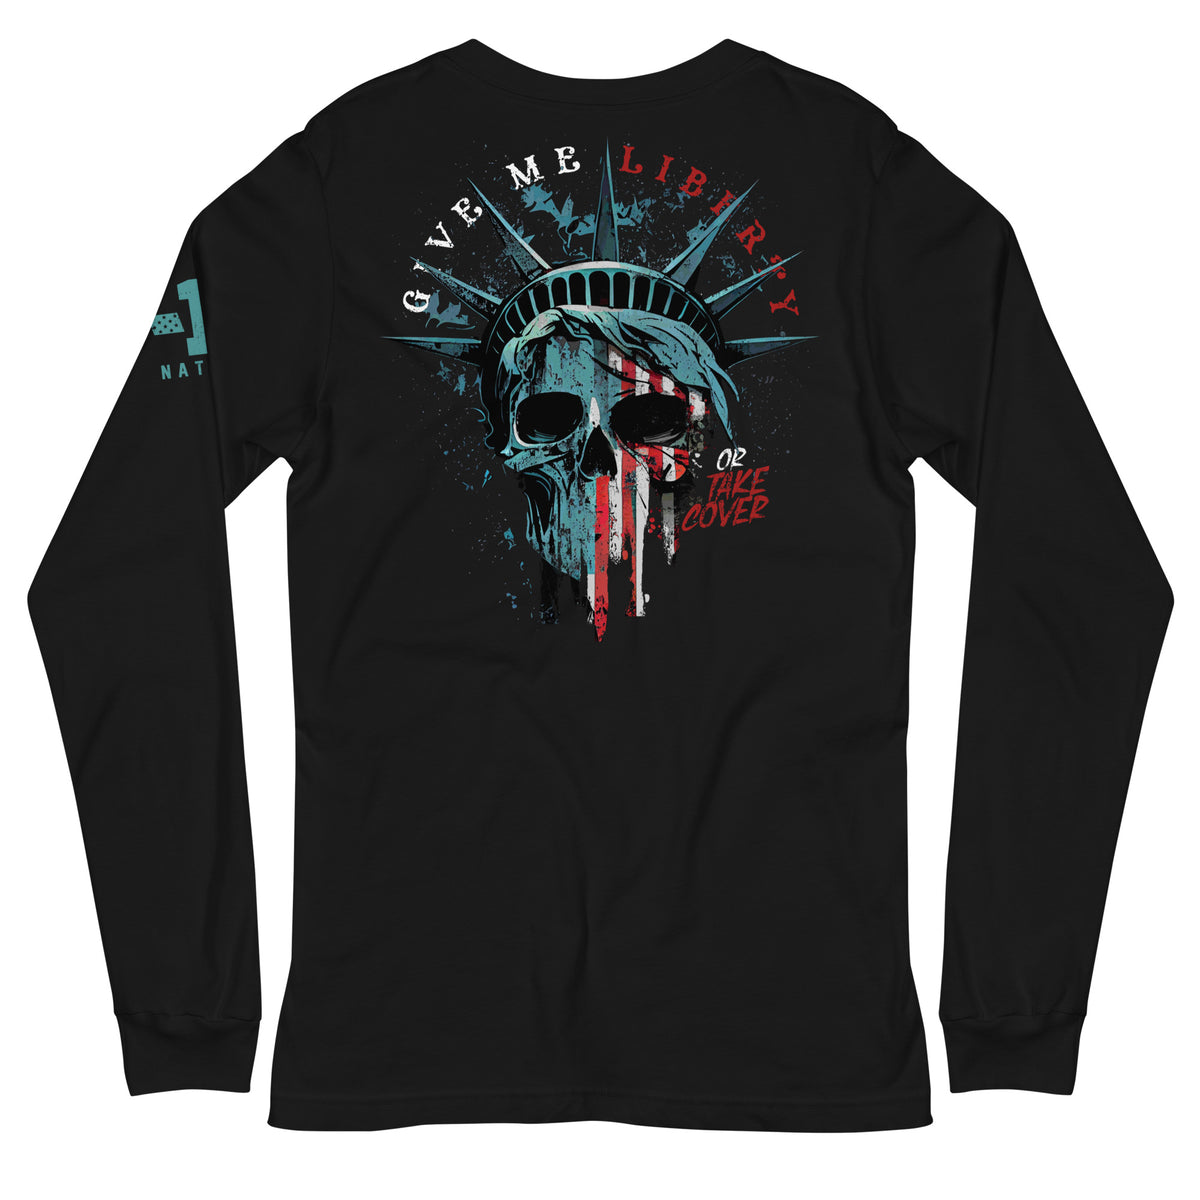 Give Me Liberty or Take Cover Long Sleeve